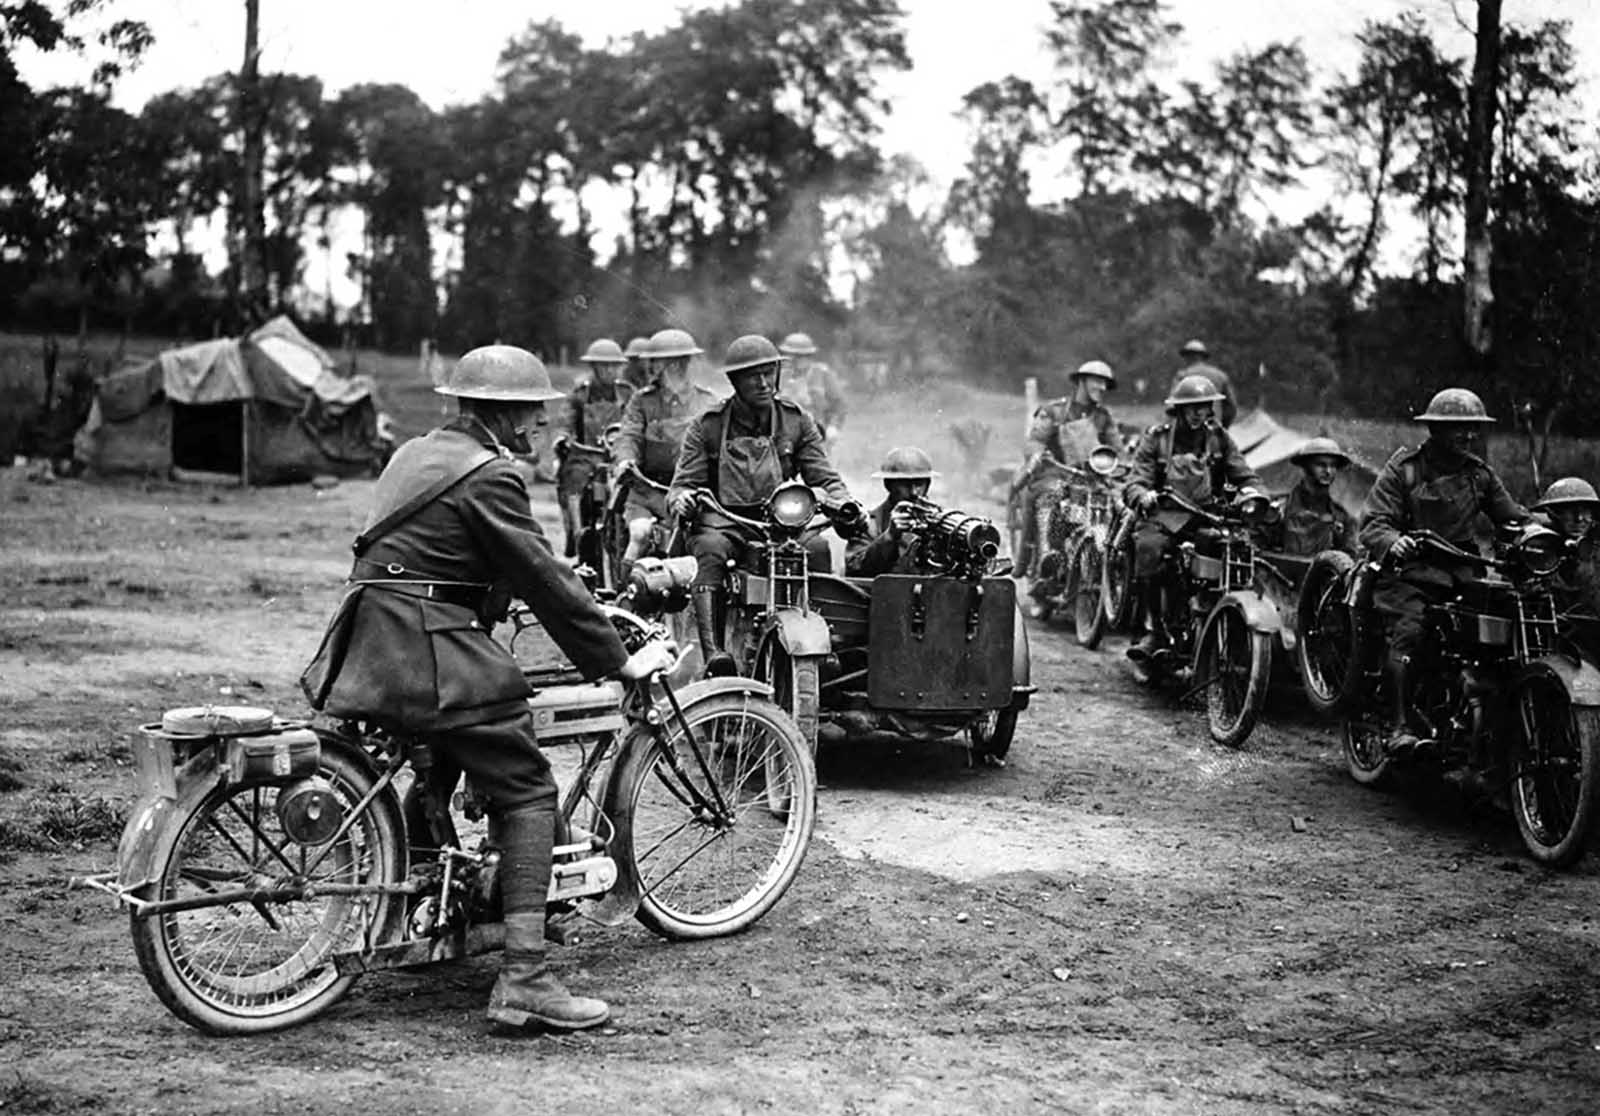 Seven or eight machine-gun crews are ready to set out on a sortie in France, ca. 1918. Each crew consists of two men, the driver on a motorbike and the gunner sitting in an armored sidecar.